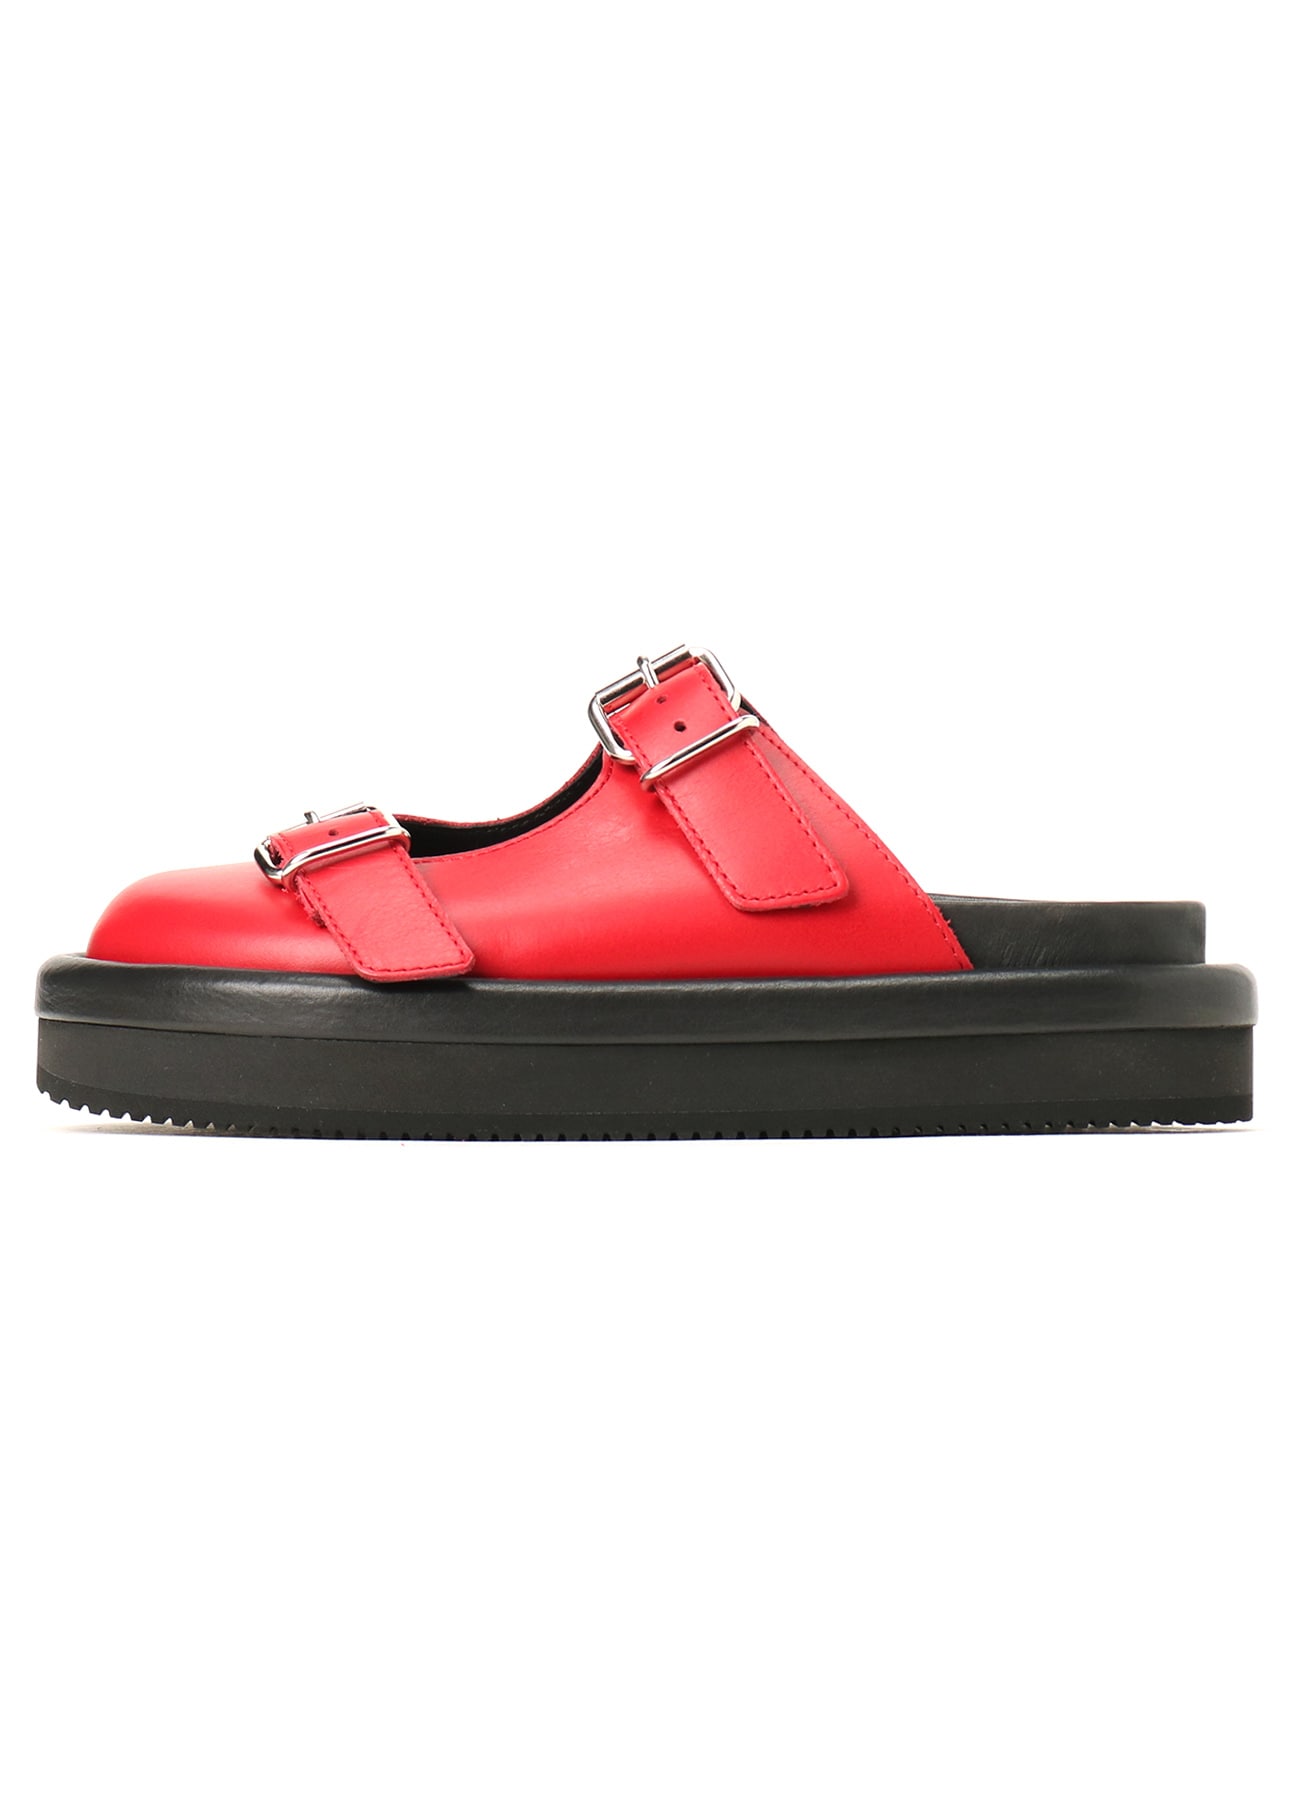 COW LEATHER BELTED SANDAL(23.5 Red): Y's.｜THE SHOP YOHJI YAMAMOTO